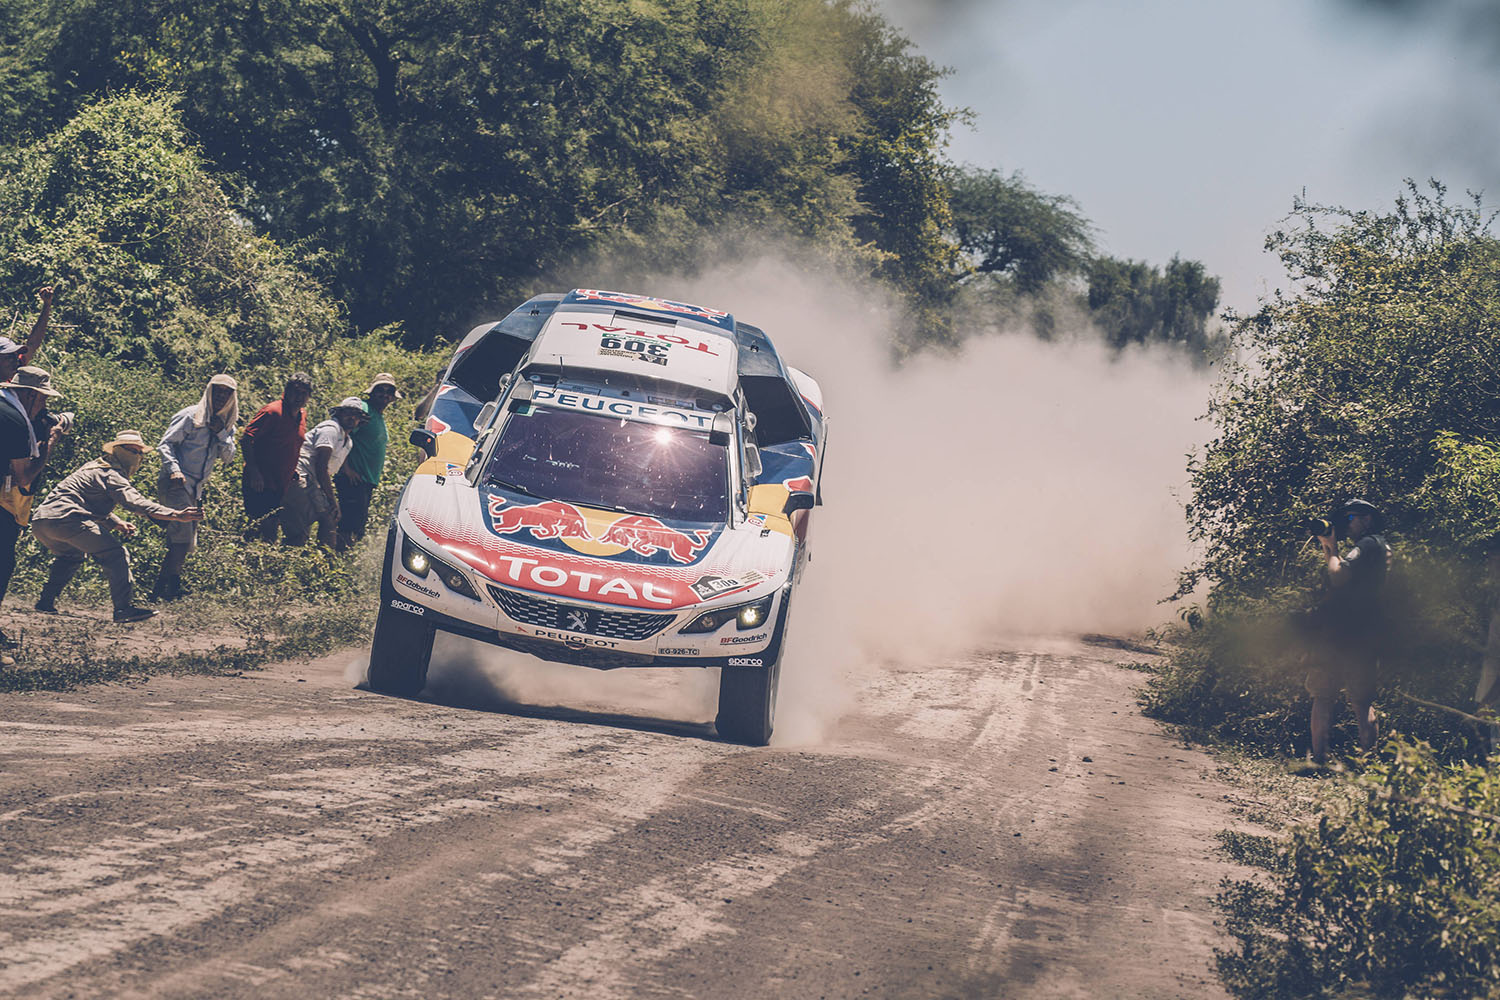 Sebastien Loeb (FRA) of Team Peugeot TOTAL races during stage 2 of Rally Dakar 2017 from Resistencia to San Miguel de Tucuman, Argentina on January 3, 2017. // Flavien Duhamel/Red Bull Content Pool